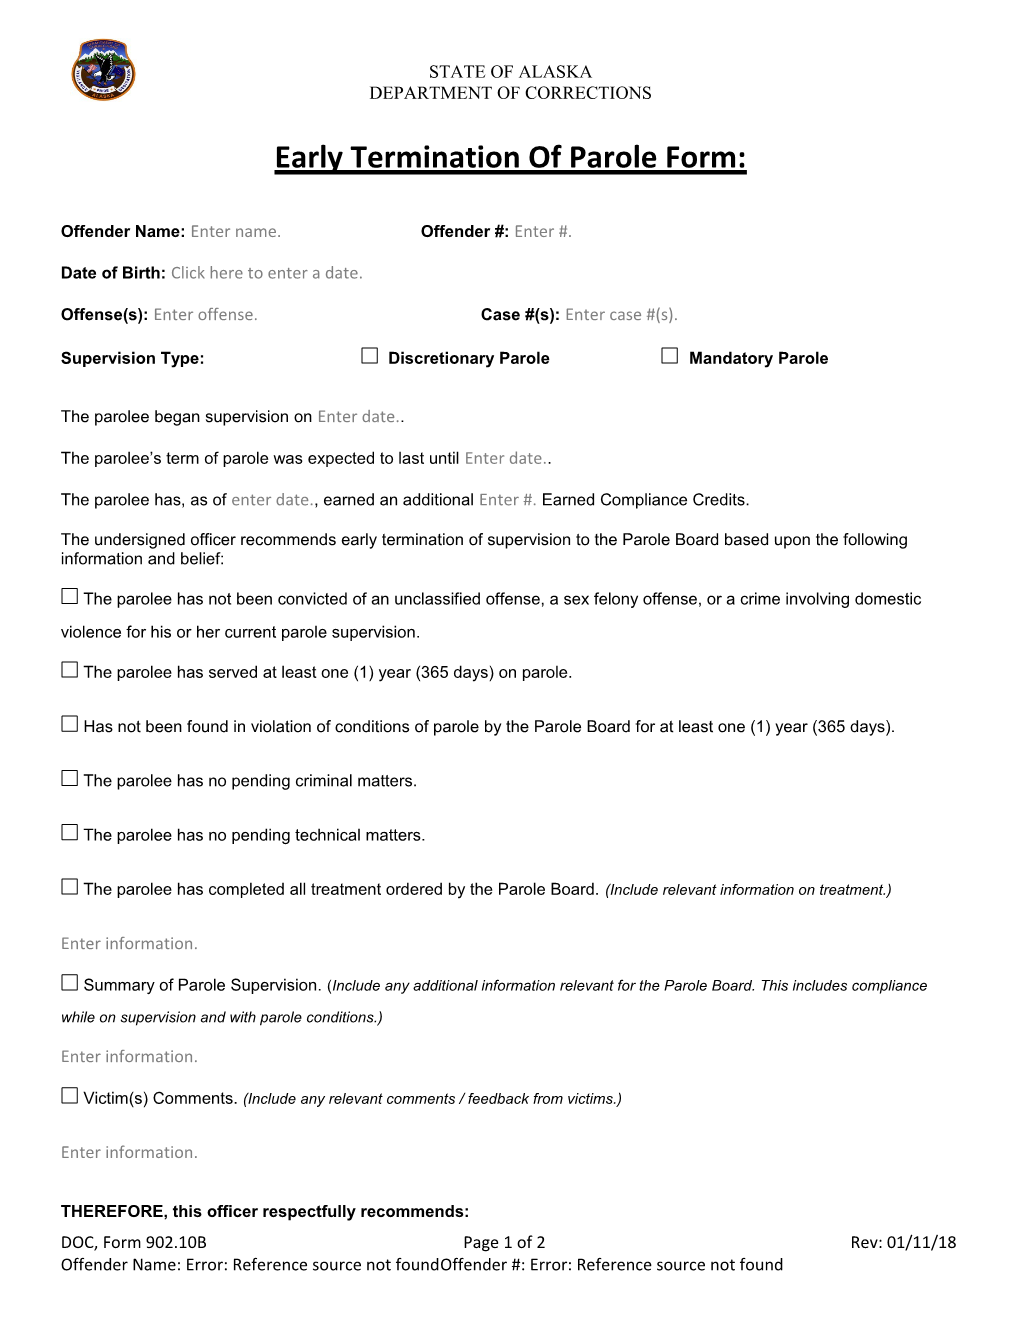 Early Termination of Parole Form